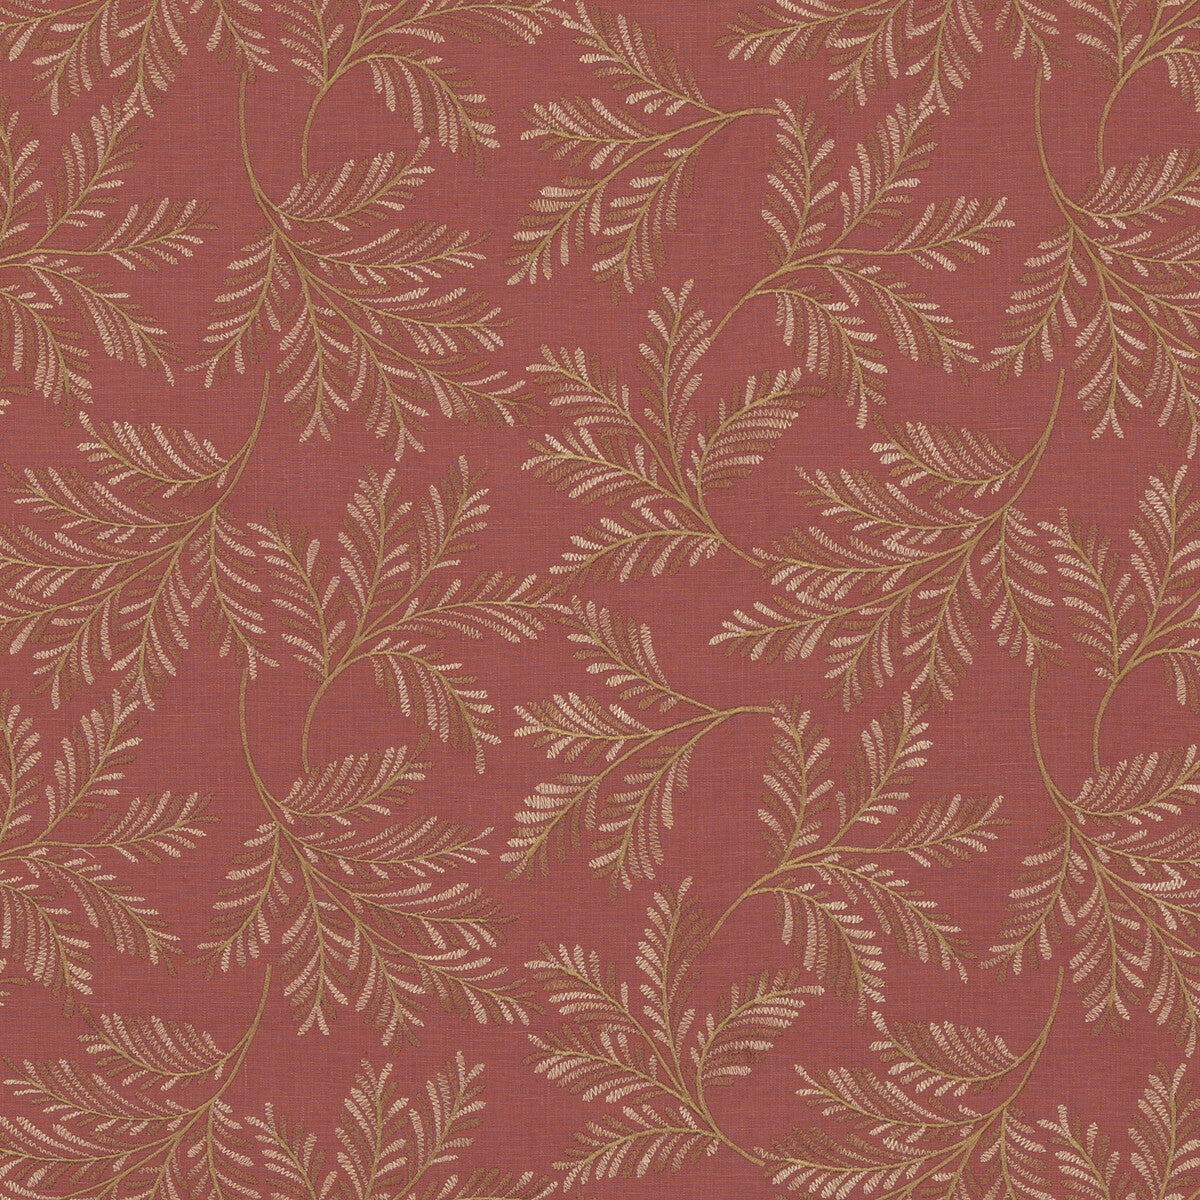 Chelsea Fern fabric in red color - pattern BF10945.450.0 - by G P &amp; J Baker in the Ashmore collection